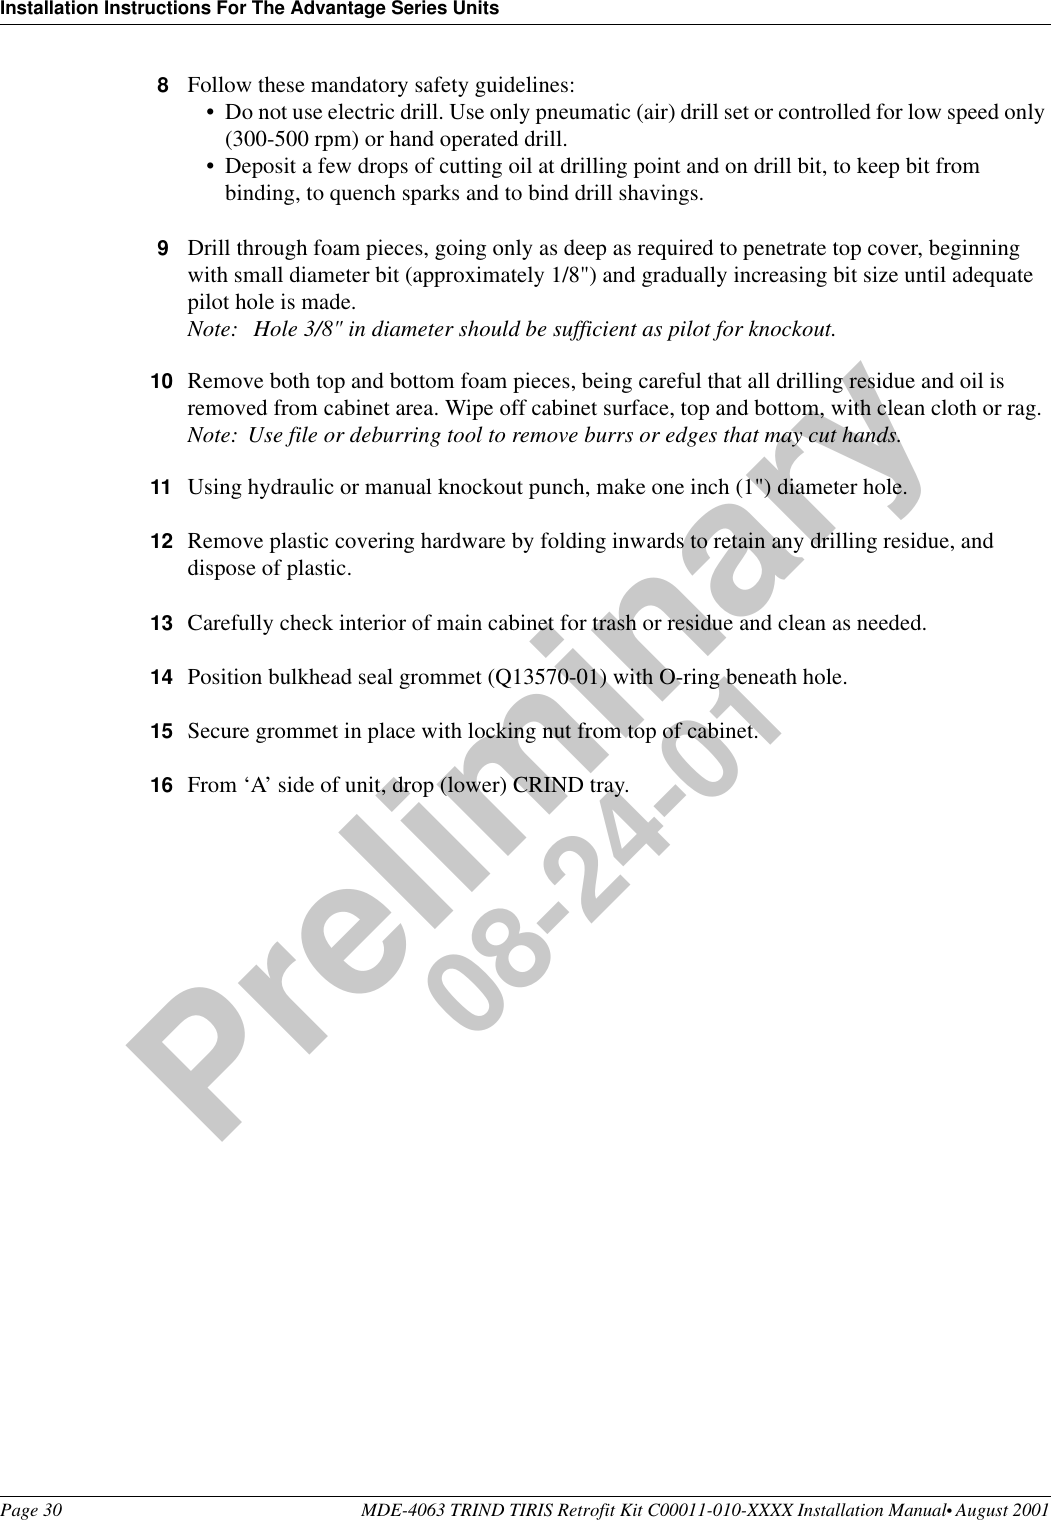 Installation Instructions For The Advantage Series UnitsPage 30 MDE-4063 TRIND TIRIS Retrofit Kit C00011-010-XXXX Installation Manual• August 2001Preliminary08-24-018Follow these mandatory safety guidelines:•Do not use electric drill. Use only pneumatic (air) drill set or controlled for low speed only (300-500 rpm) or hand operated drill.•Deposit a few drops of cutting oil at drilling point and on drill bit, to keep bit from binding, to quench sparks and to bind drill shavings.9Drill through foam pieces, going only as deep as required to penetrate top cover, beginning with small diameter bit (approximately 1/8&quot;) and gradually increasing bit size until adequate pilot hole is made.Note:  Hole 3/8&quot; in diameter should be sufficient as pilot for knockout.10 Remove both top and bottom foam pieces, being careful that all drilling residue and oil is removed from cabinet area. Wipe off cabinet surface, top and bottom, with clean cloth or rag.Note: Use file or deburring tool to remove burrs or edges that may cut hands.11 Using hydraulic or manual knockout punch, make one inch (1&quot;) diameter hole.12 Remove plastic covering hardware by folding inwards to retain any drilling residue, and dispose of plastic.13 Carefully check interior of main cabinet for trash or residue and clean as needed.14 Position bulkhead seal grommet (Q13570-01) with O-ring beneath hole.15 Secure grommet in place with locking nut from top of cabinet.16 From ‘A’ side of unit, drop (lower) CRIND tray.